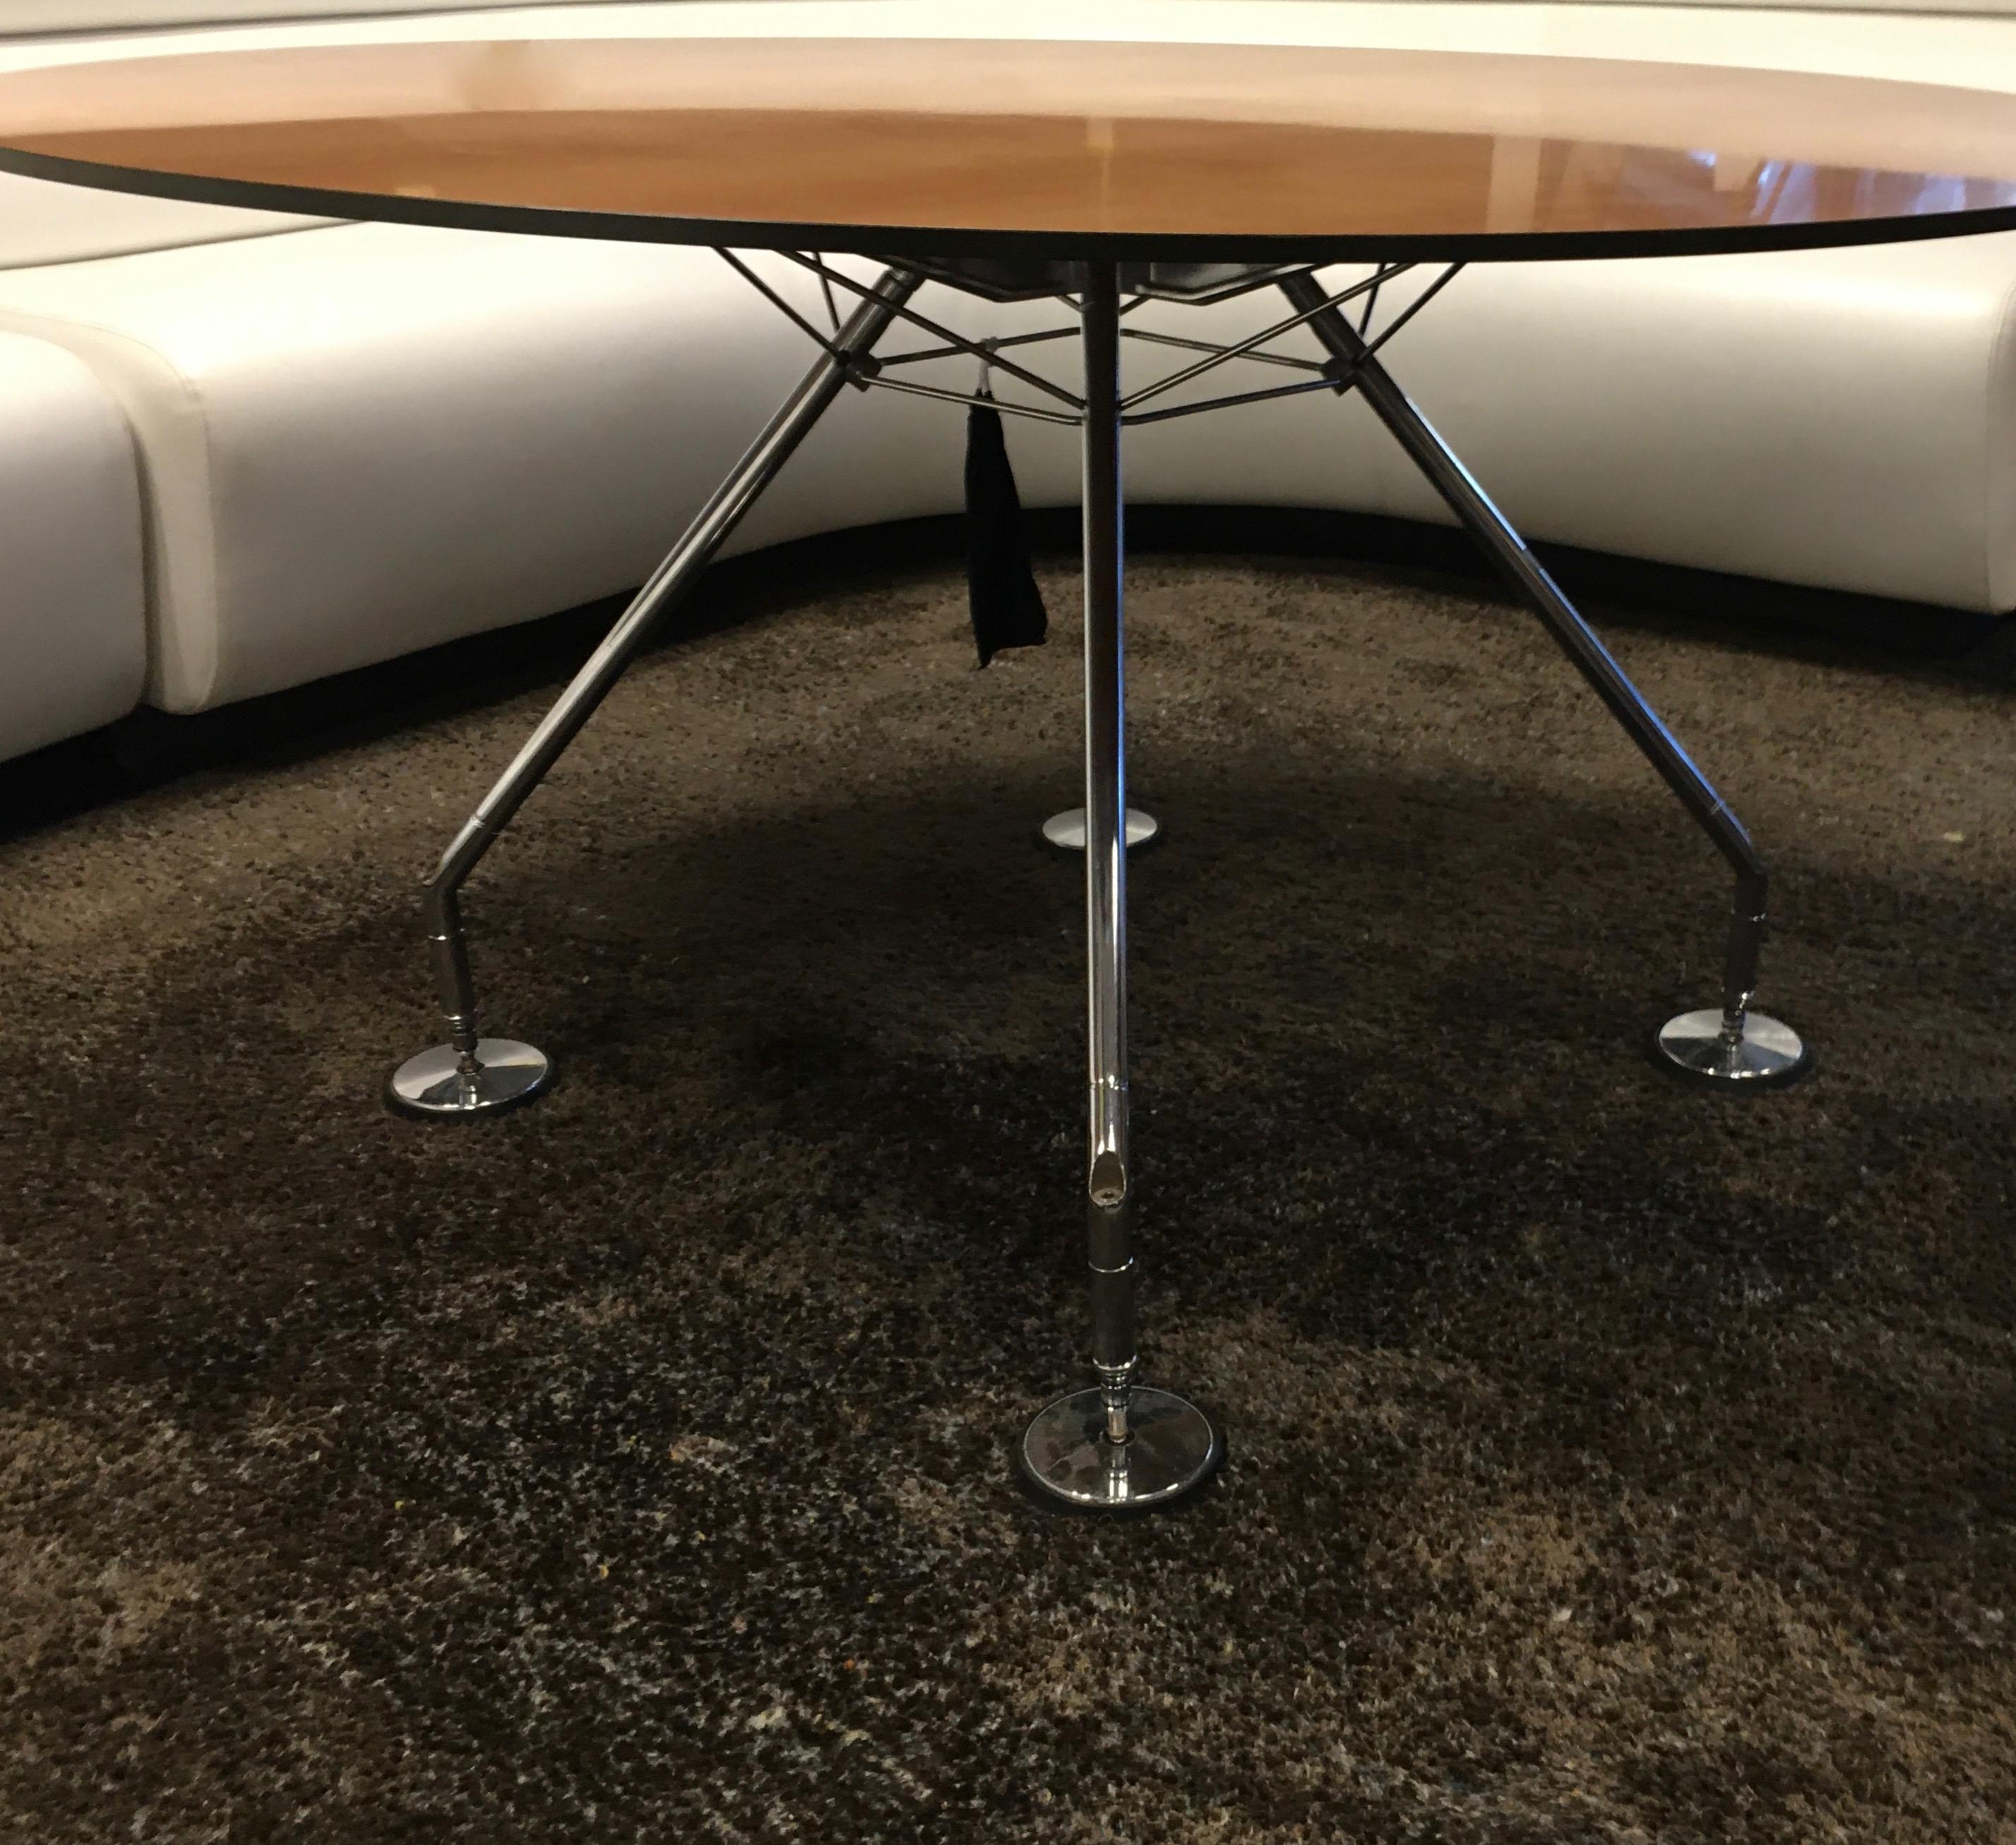 Futurist dining or conference table with a light walnut top.
Designed by Norman Foster for Tecno.
Italy around 2000.